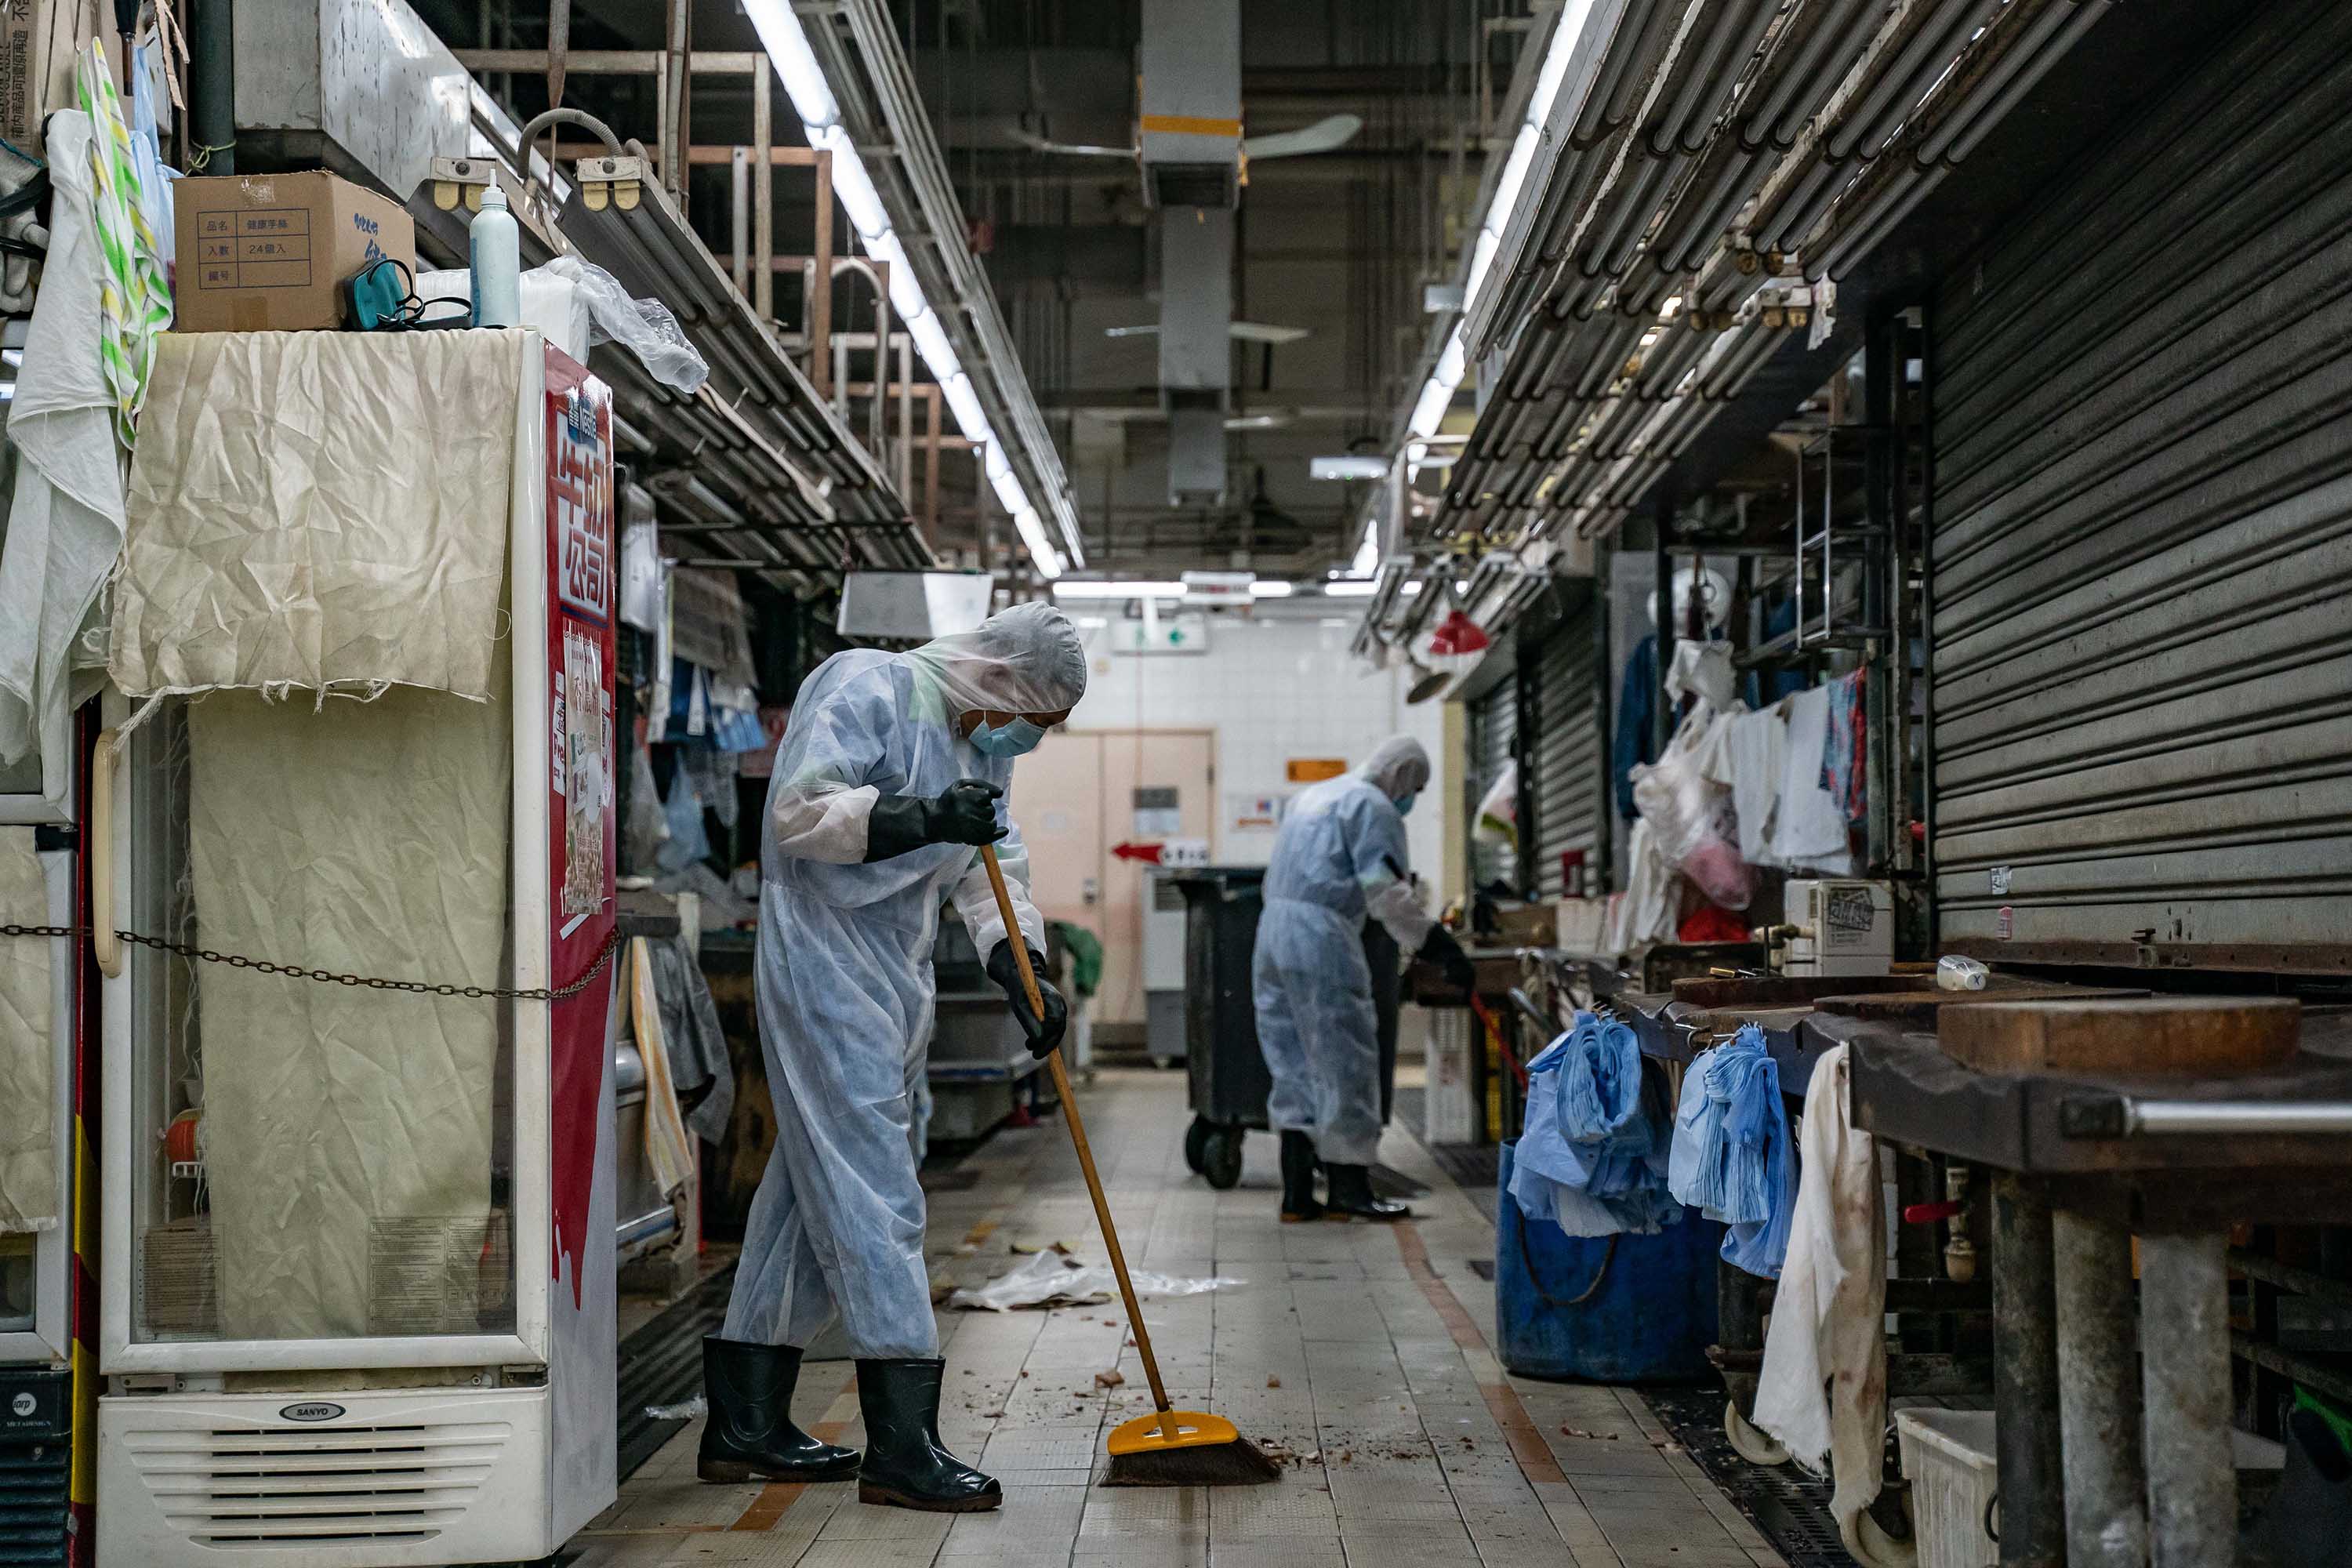 Workers clean and disinfect a wet market in Hong Kong on July 19.